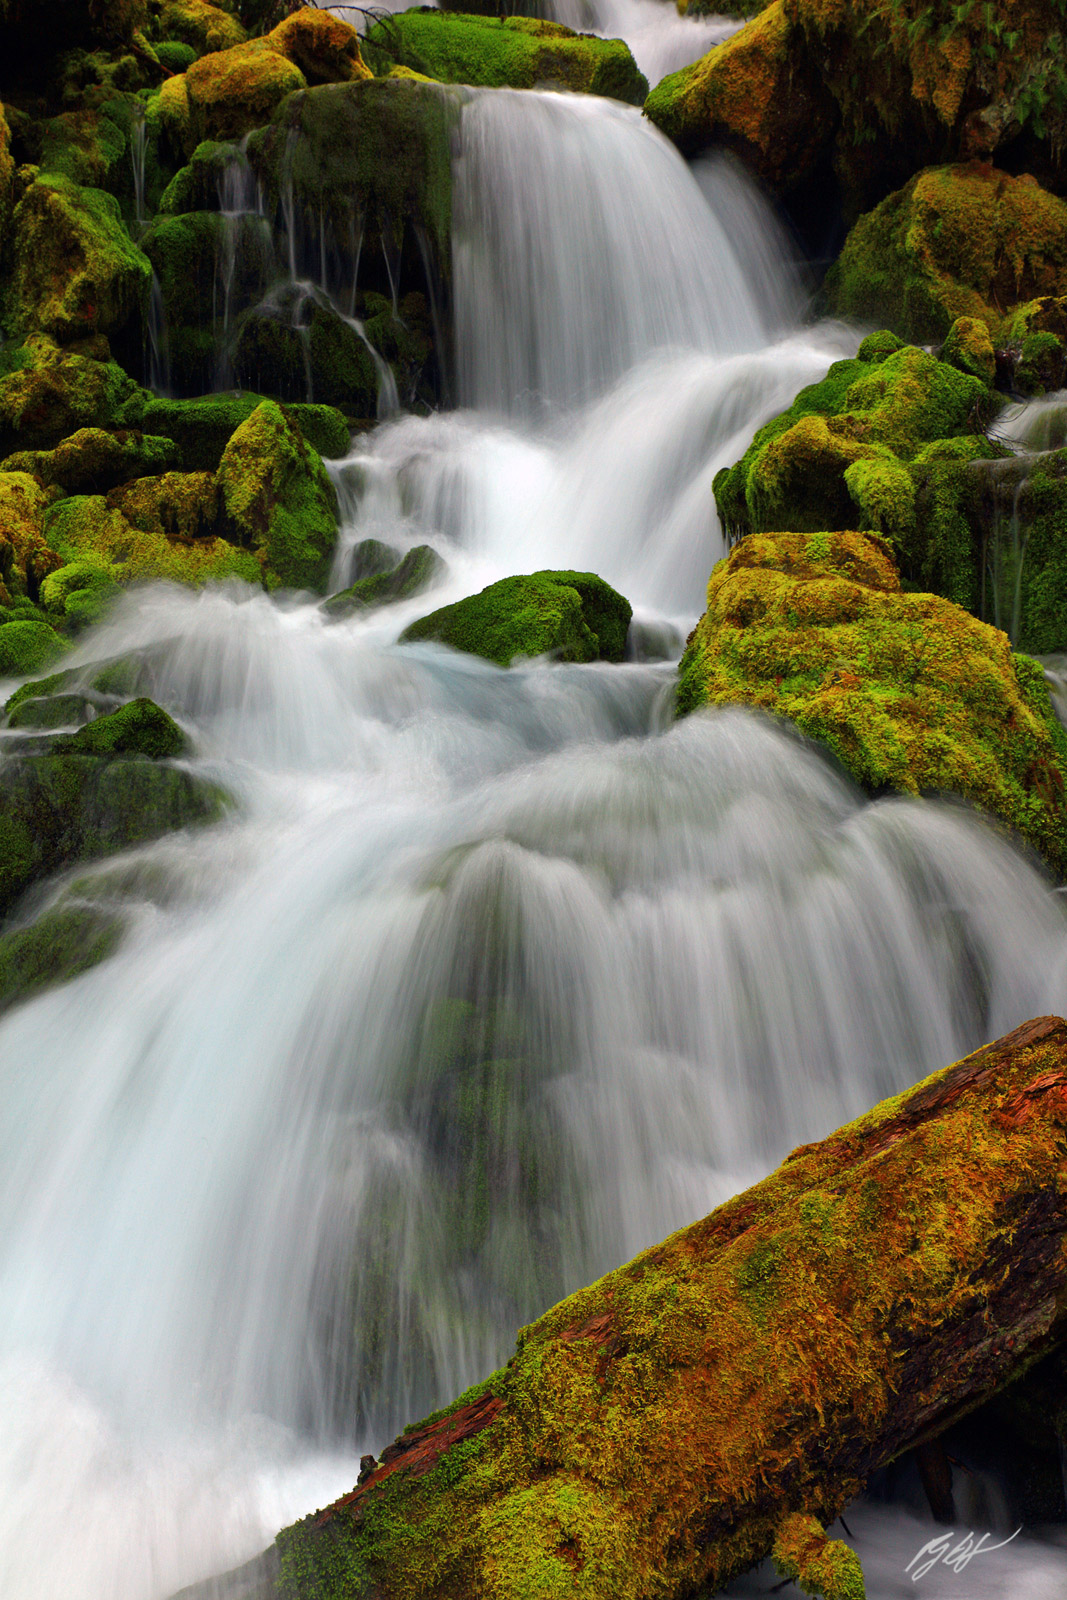 A Magic Secret Waterfall in the Gifford-Pinchot National Forest in Southern Washington